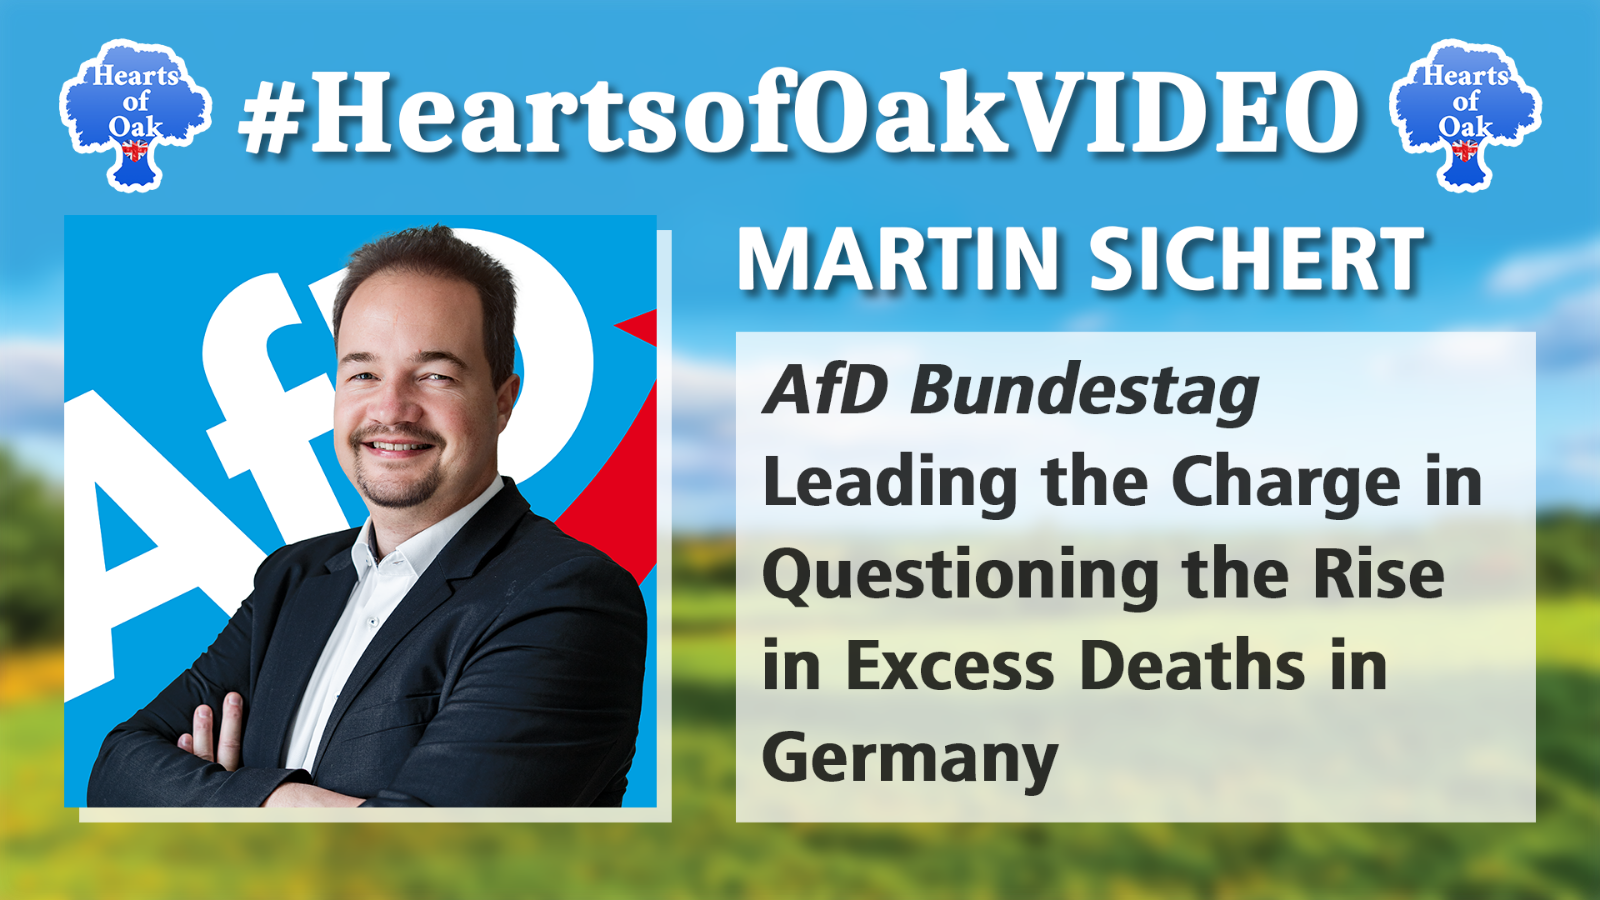 Martin Sichert AfD Bundestag: Leading the Charge in Questioning the Rise of Excess Deaths in Germany